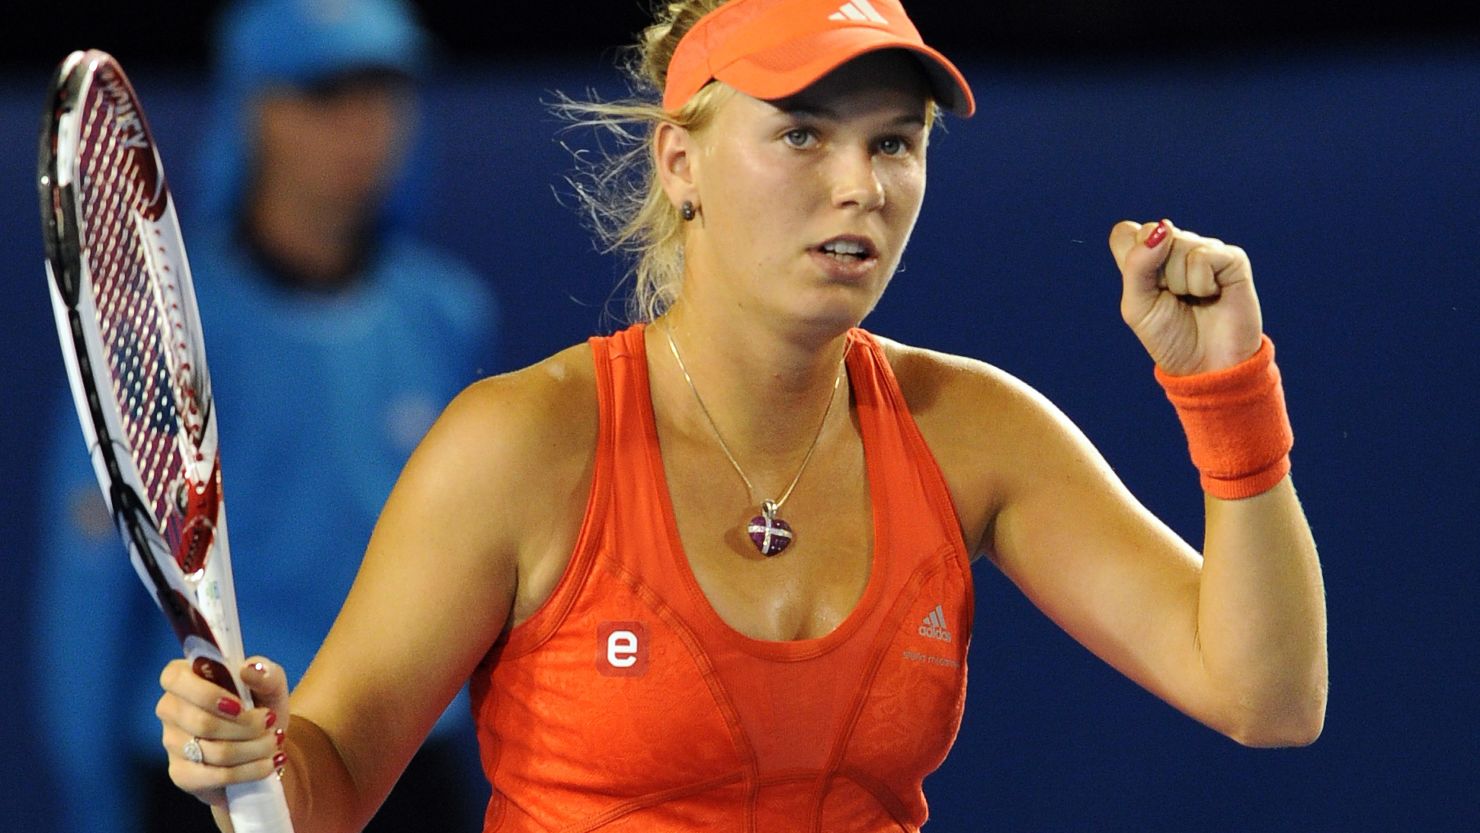 Top seed Caroline Wozniacki was not hampered by her recent wrist injury during Monday's victory at the Australian Open.